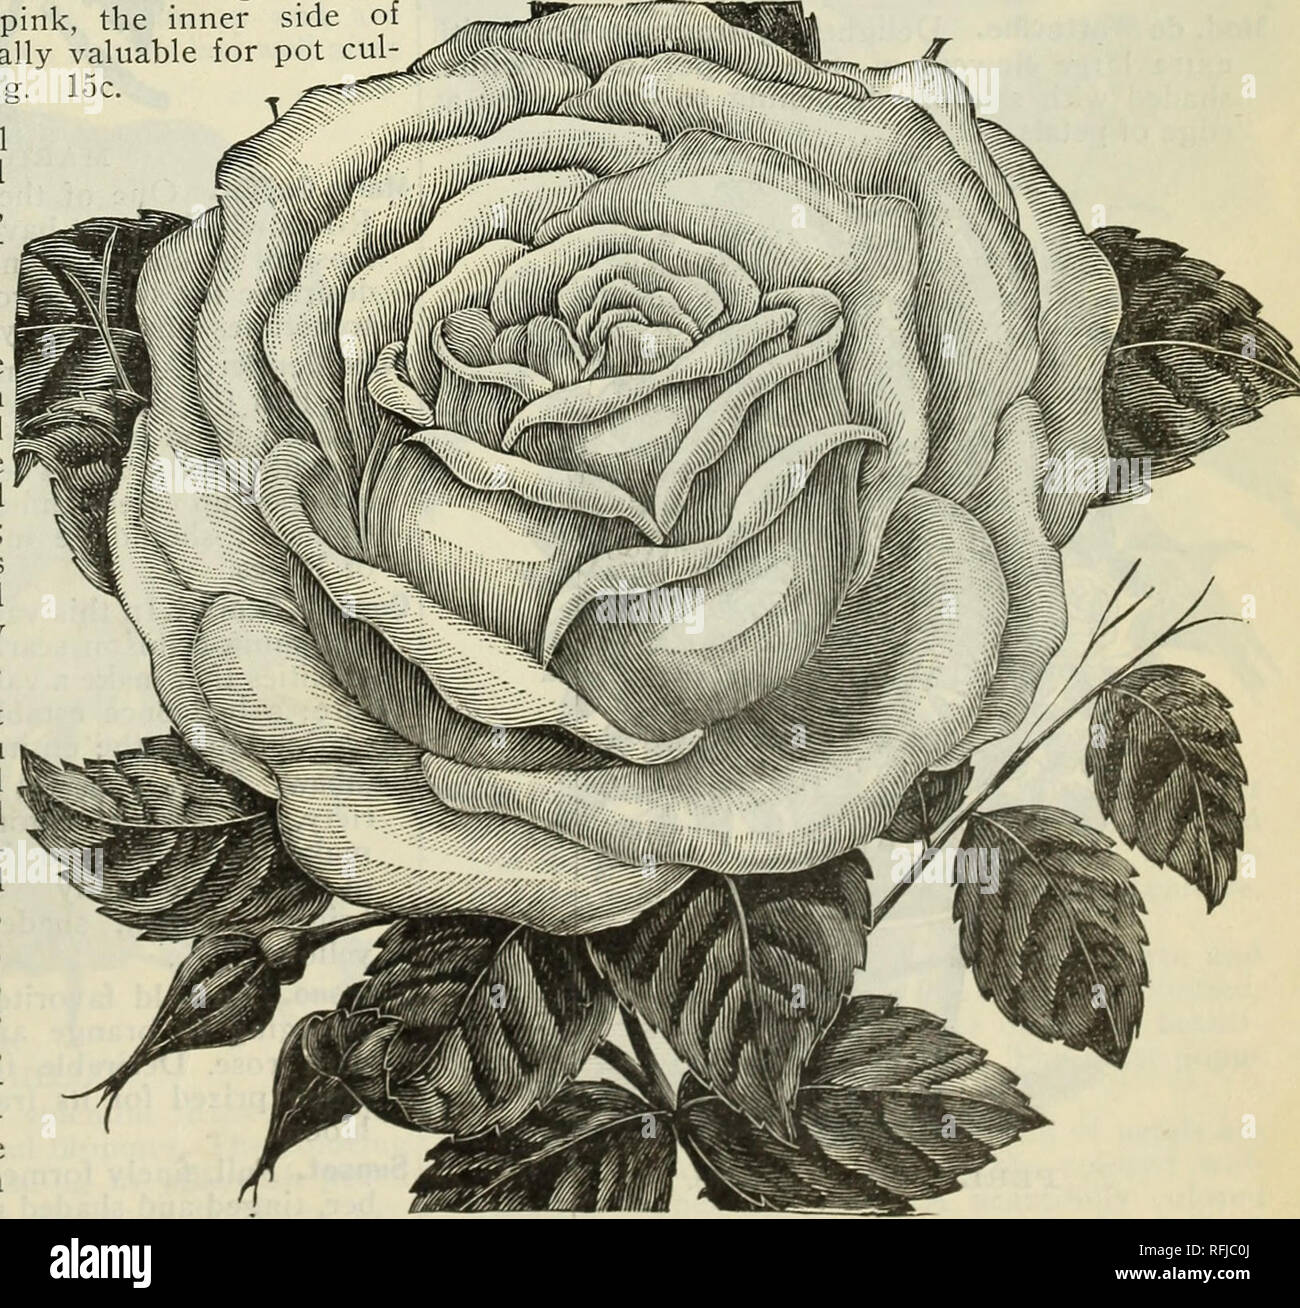 . Spring 1899. Nursery stock Ohio Catalogs; Vegetables Seeds Catalogs; Flowers Catalogs; Bulbs (Plants) Catalogs; Plants, Ornamental Catalogs; Fruit trees Seedlings Catalogs; Fruit Catalogs. MAMAN COCHET. Mad Jos. Schwartz. One of the most hardy Tea Roses and particularly adapted for open-ground planting. It produces its bloom in great profusion; color, white, beautifully flushed with pink. Mad. Welche. Color beautiful amber yellow, deep- ening to coppery yellow at the center, delicaLely tinged and shaded with dark orange red; flowers extra large globular form, very double and full. Marion Din Stock Photo